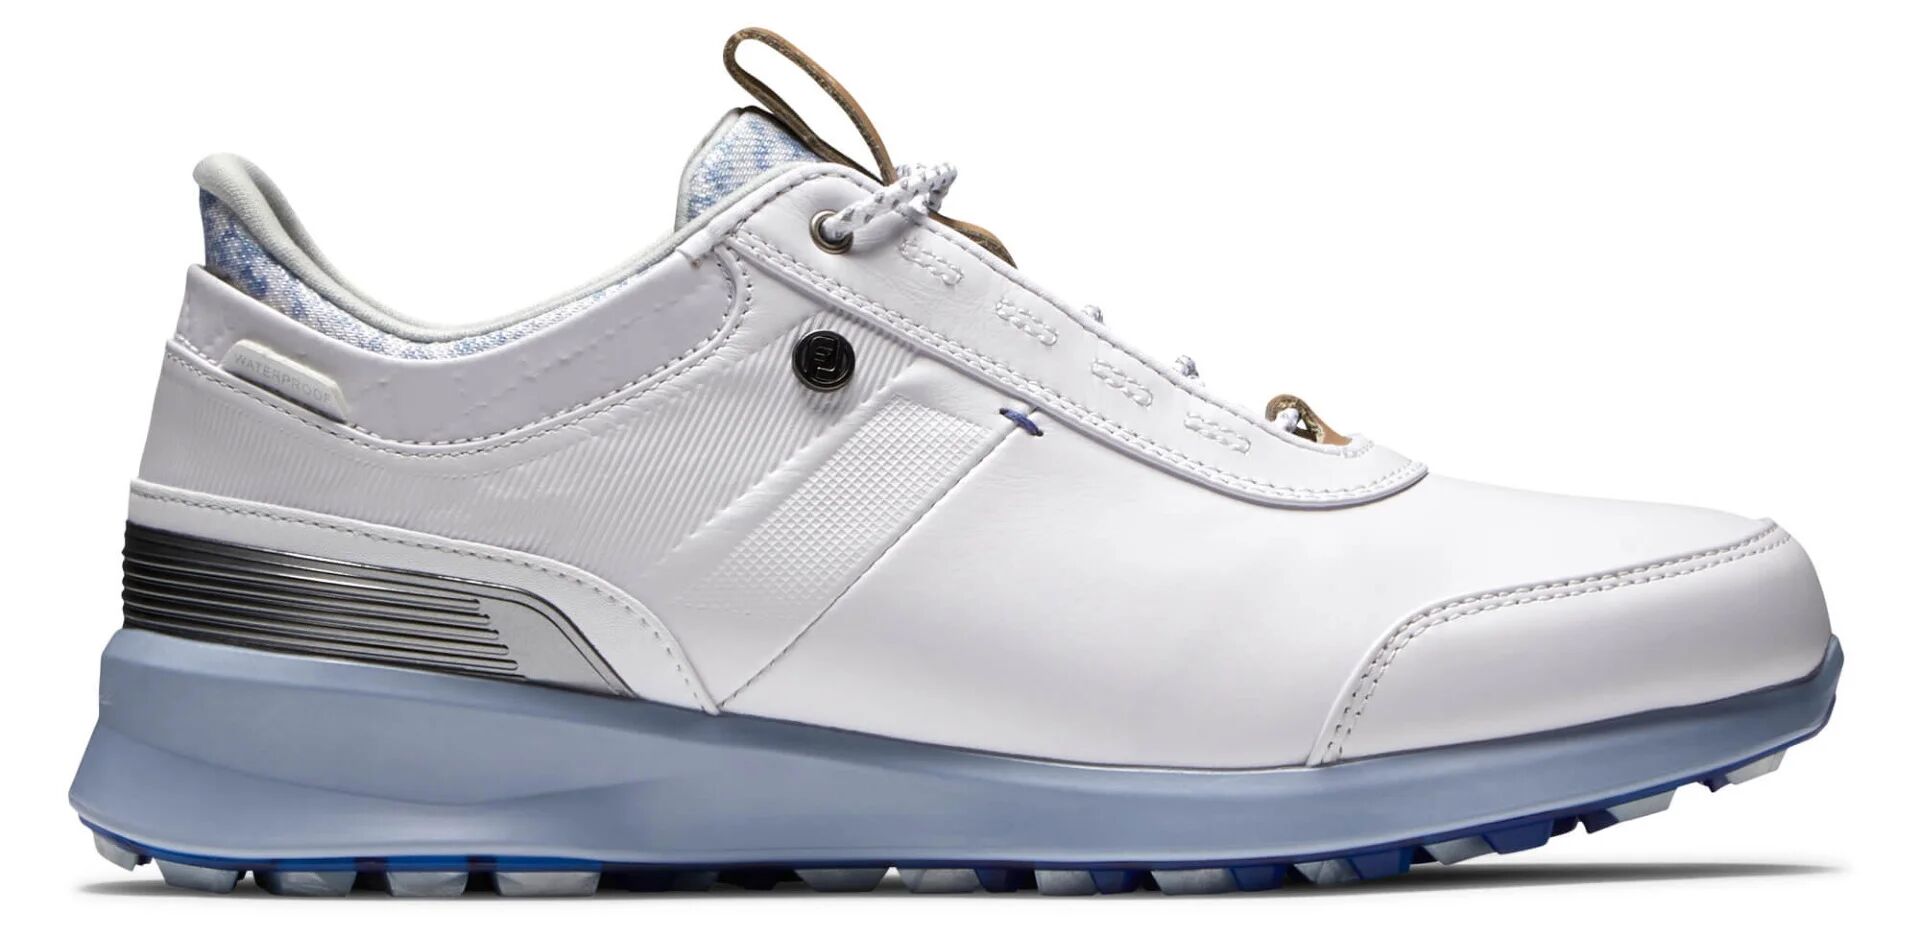 FootJoy Women's Stratos Golf Shoes in White, Size 6, Wide